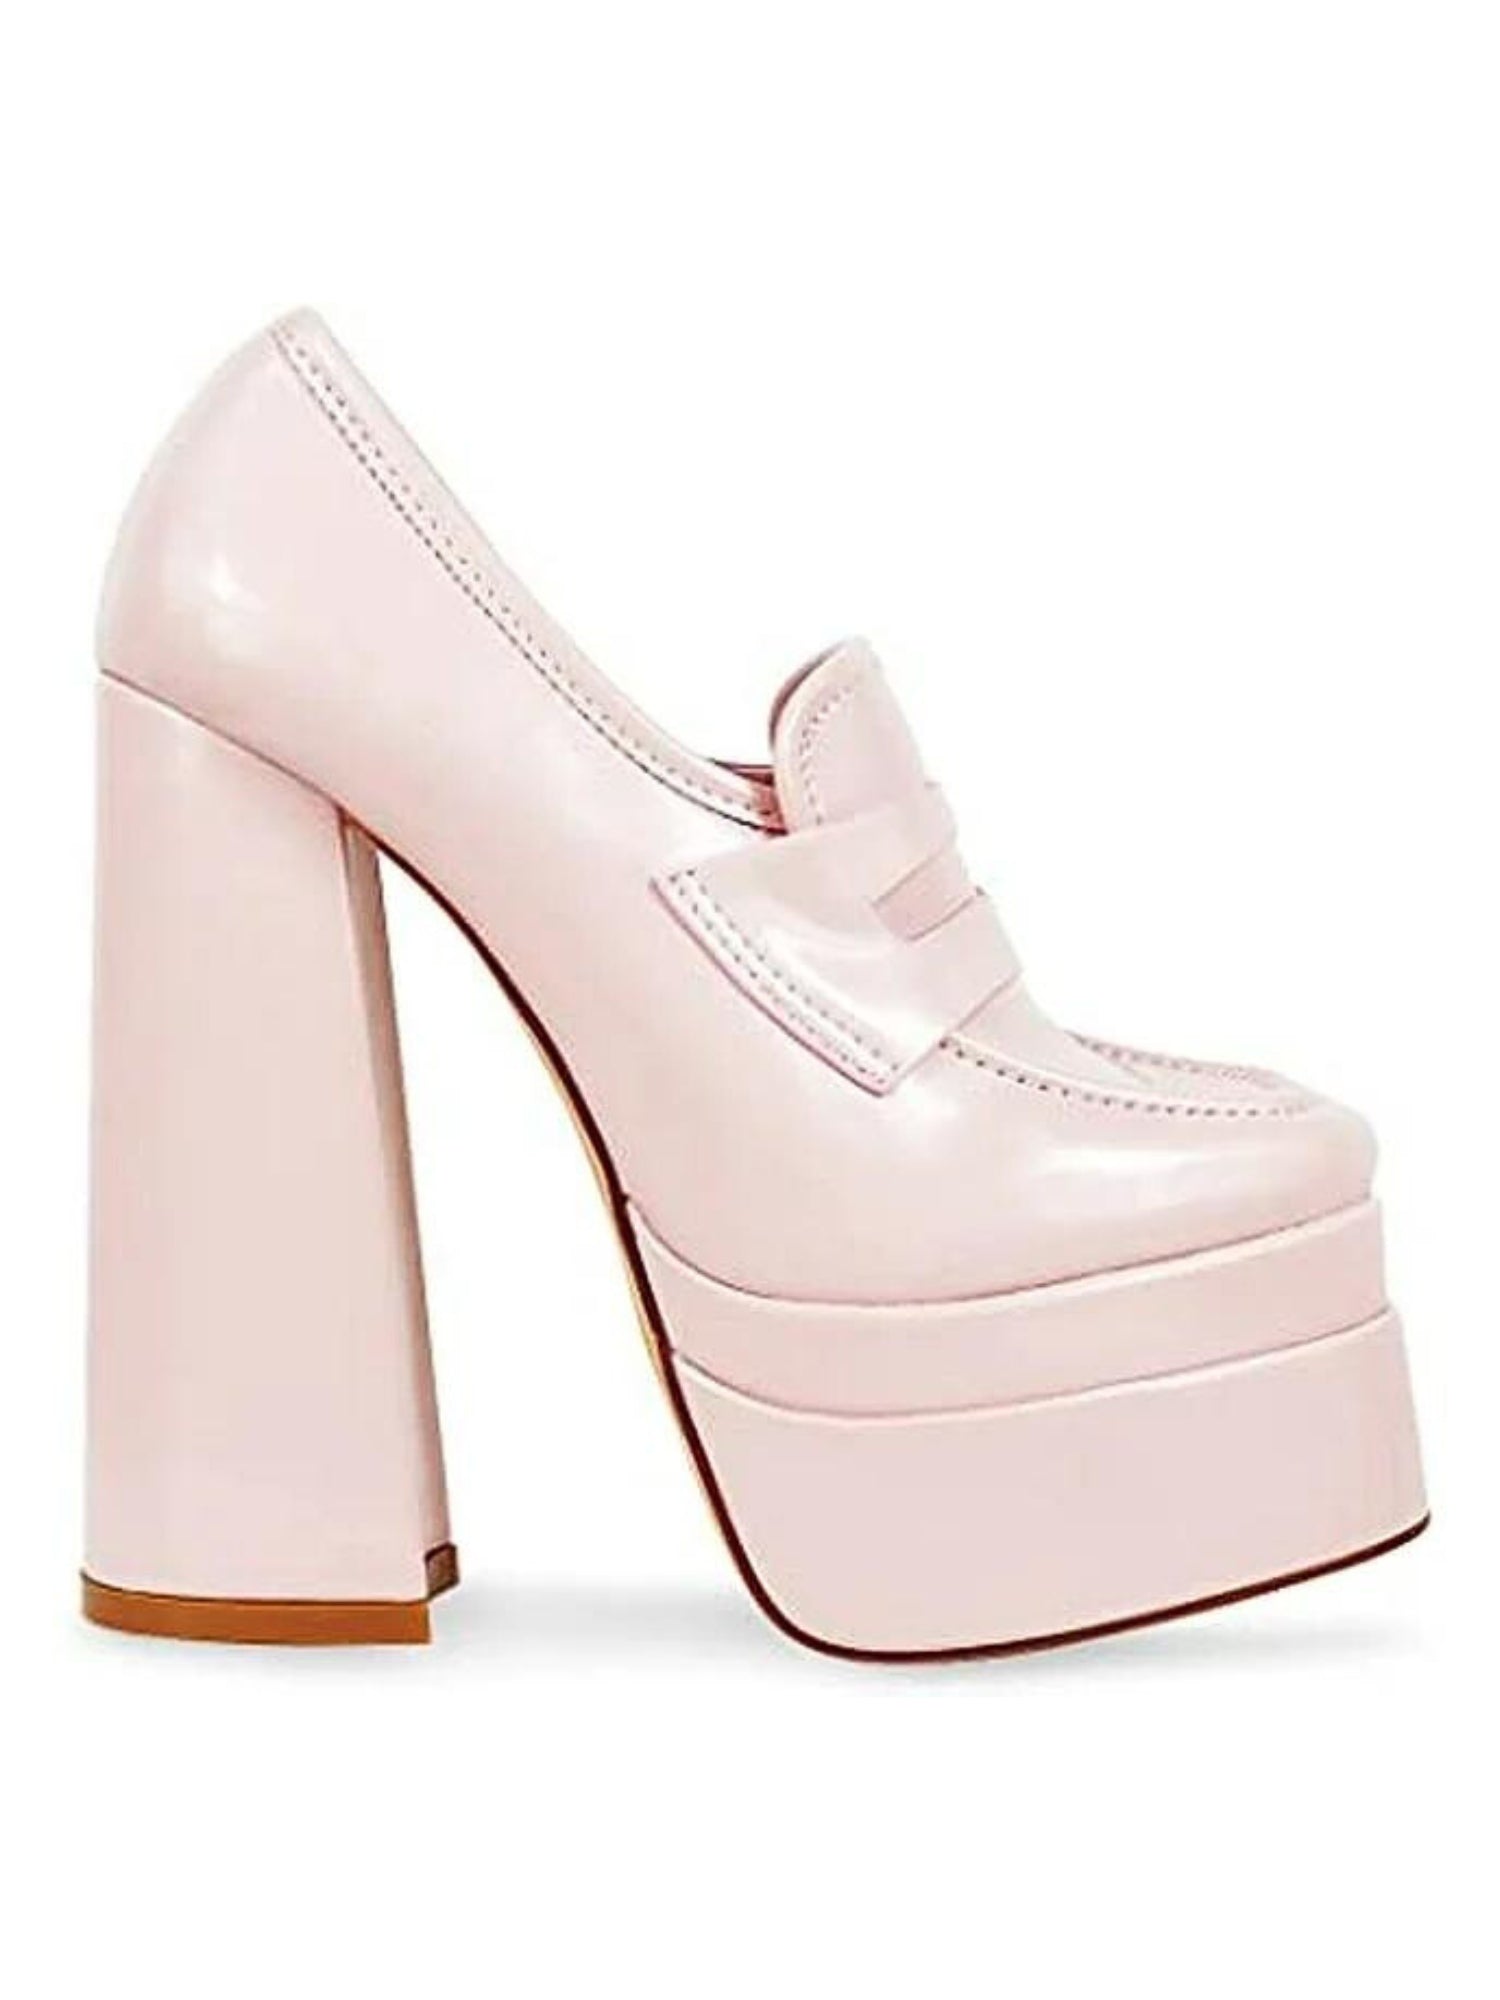 Just like Barbie Platforms, Shoes, ISC - Ivory Sheep Collection Limited